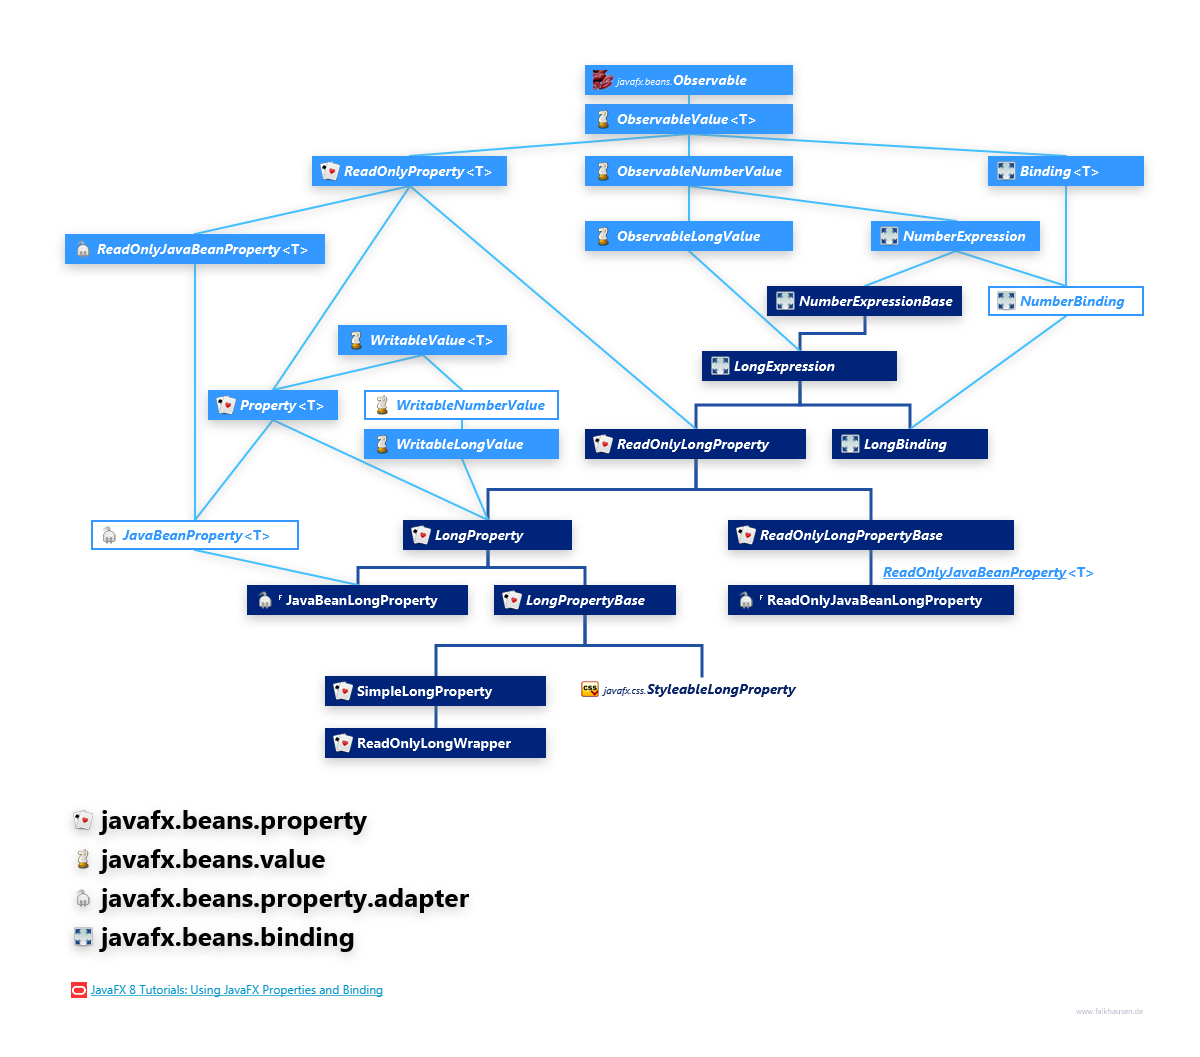 javafx.beans.property javafx.beans.value javafx.beans.property.adapter javafx.beans.binding LongProperty Hierarchy class diagram and api documentation for JavaFX 10